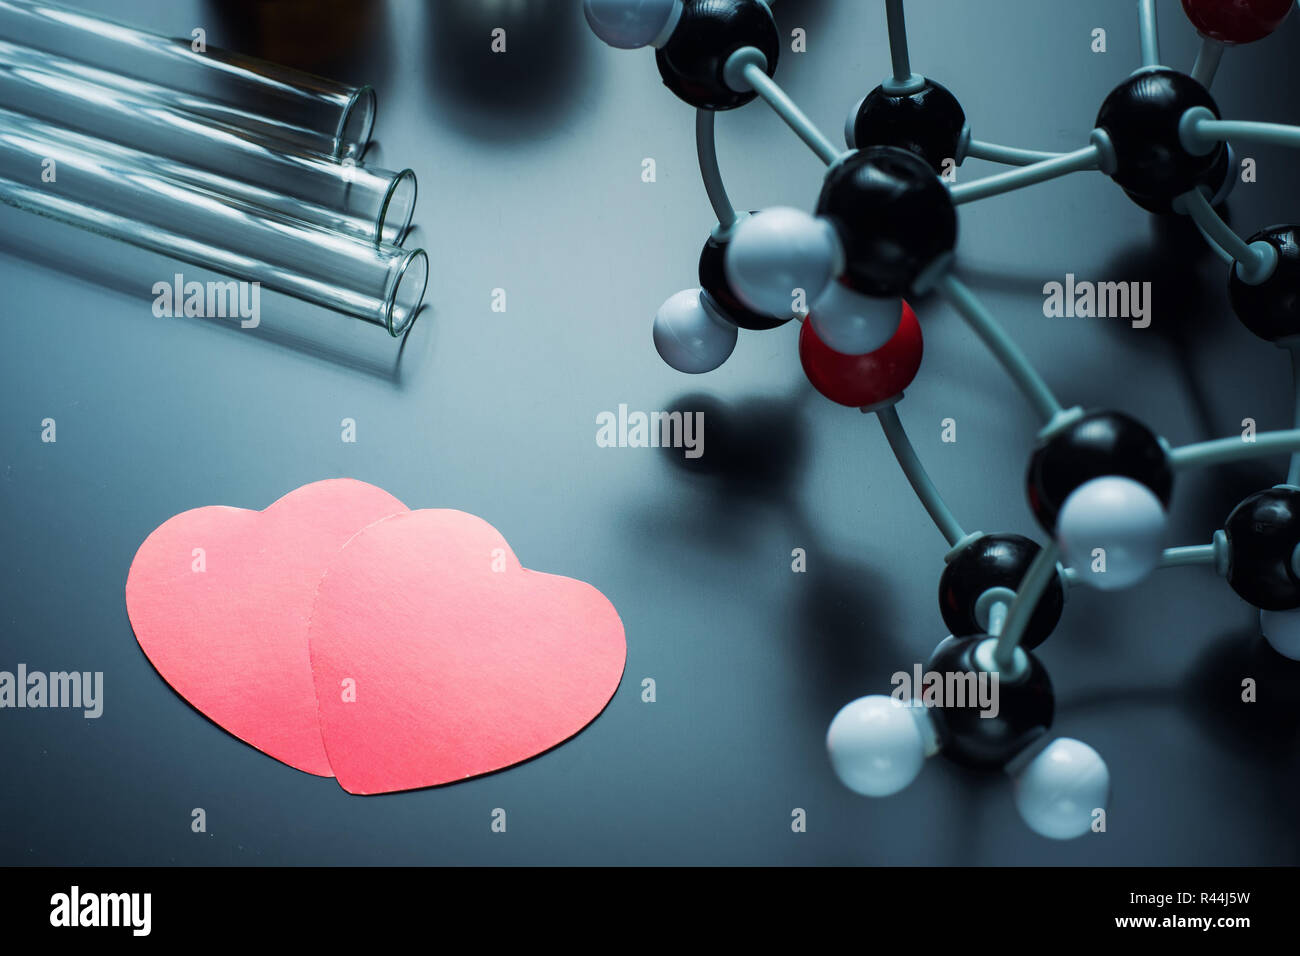 Two red paper hearts and molecular structure model on black background.  Love chemistry concept Stock Photo - Alamy